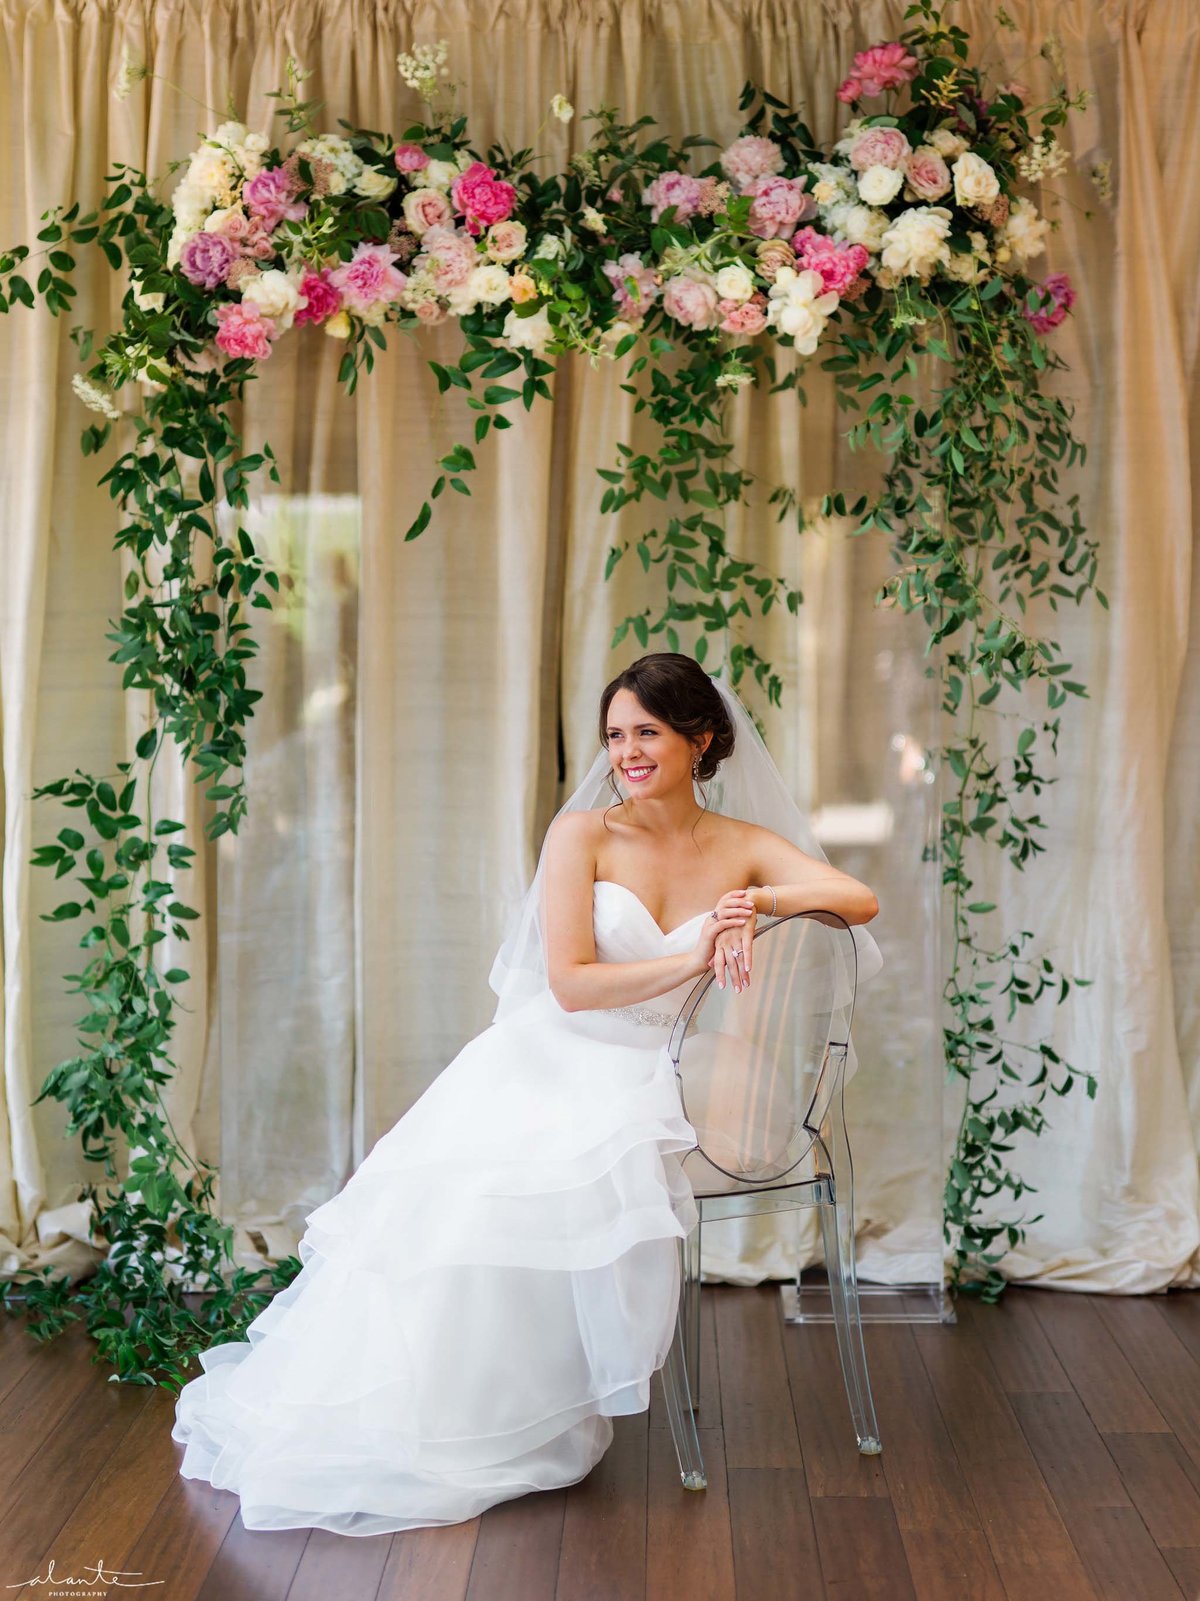 Stunning lucite wedding ceremony arch with smilax and blush peonies.